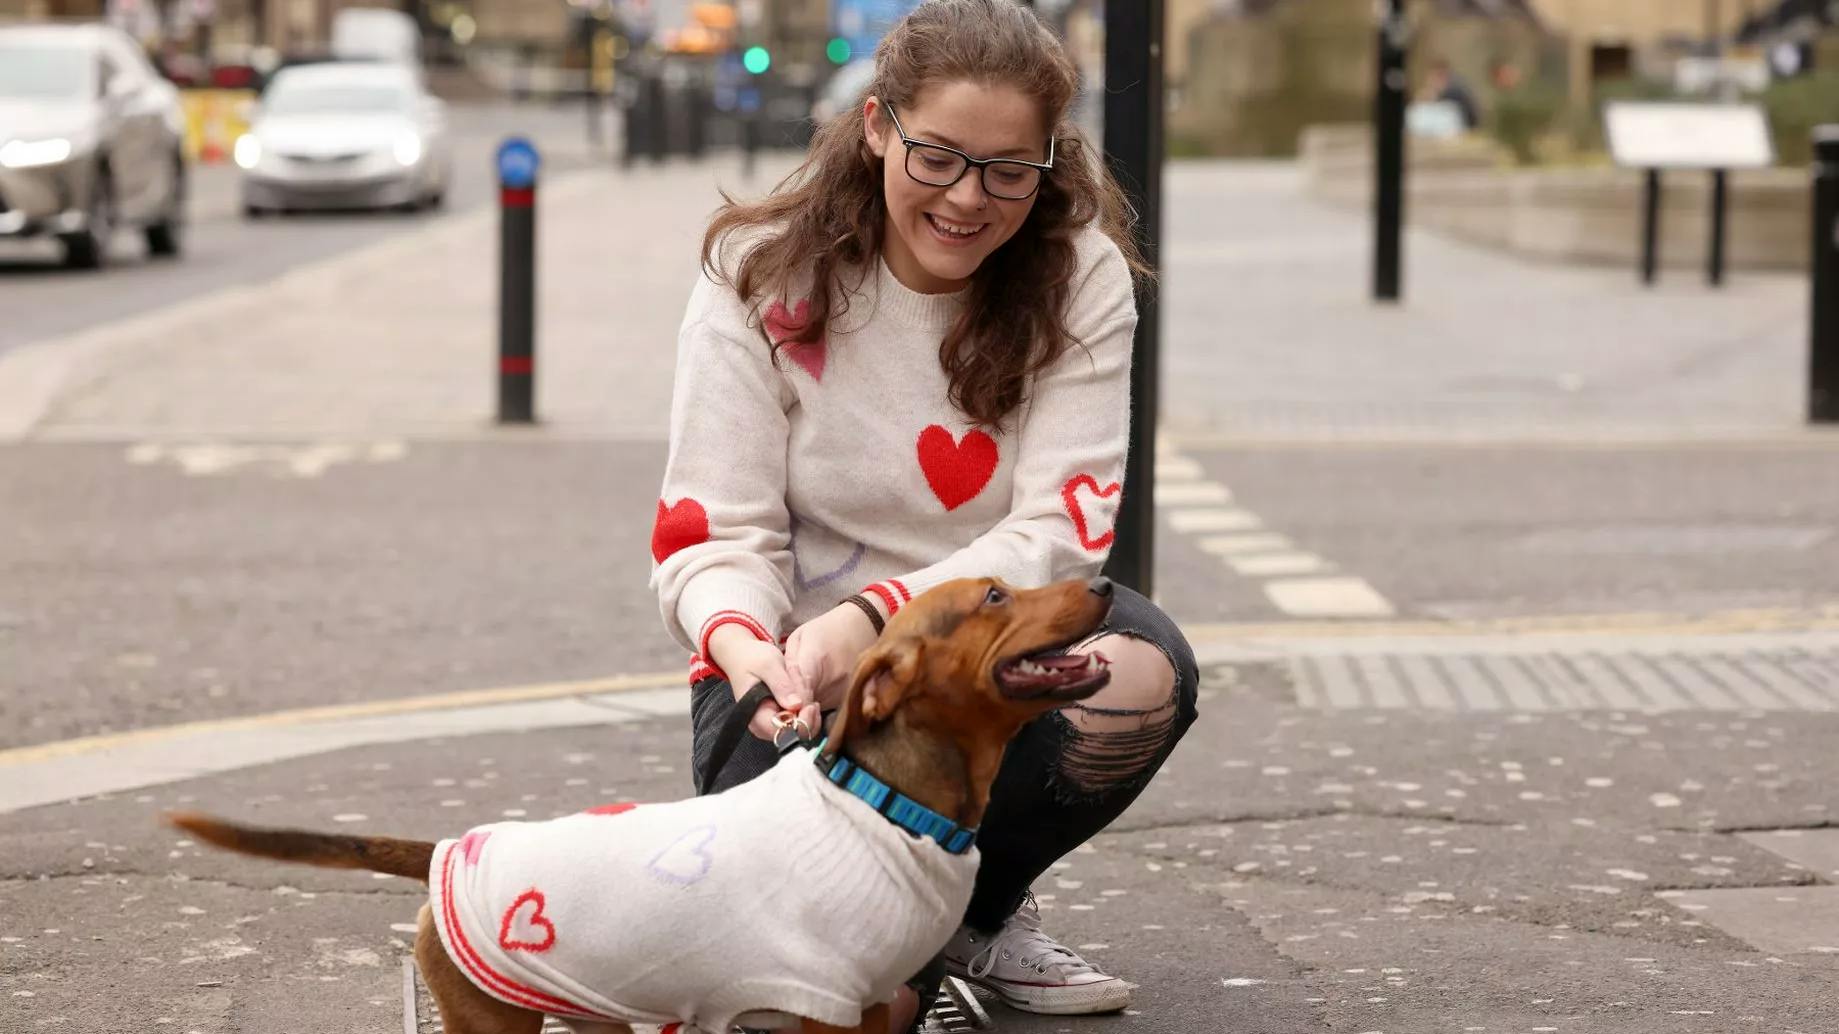 Love in the air at Valentine’s event in Newcastle as dogs descend on Pup Up Cafe